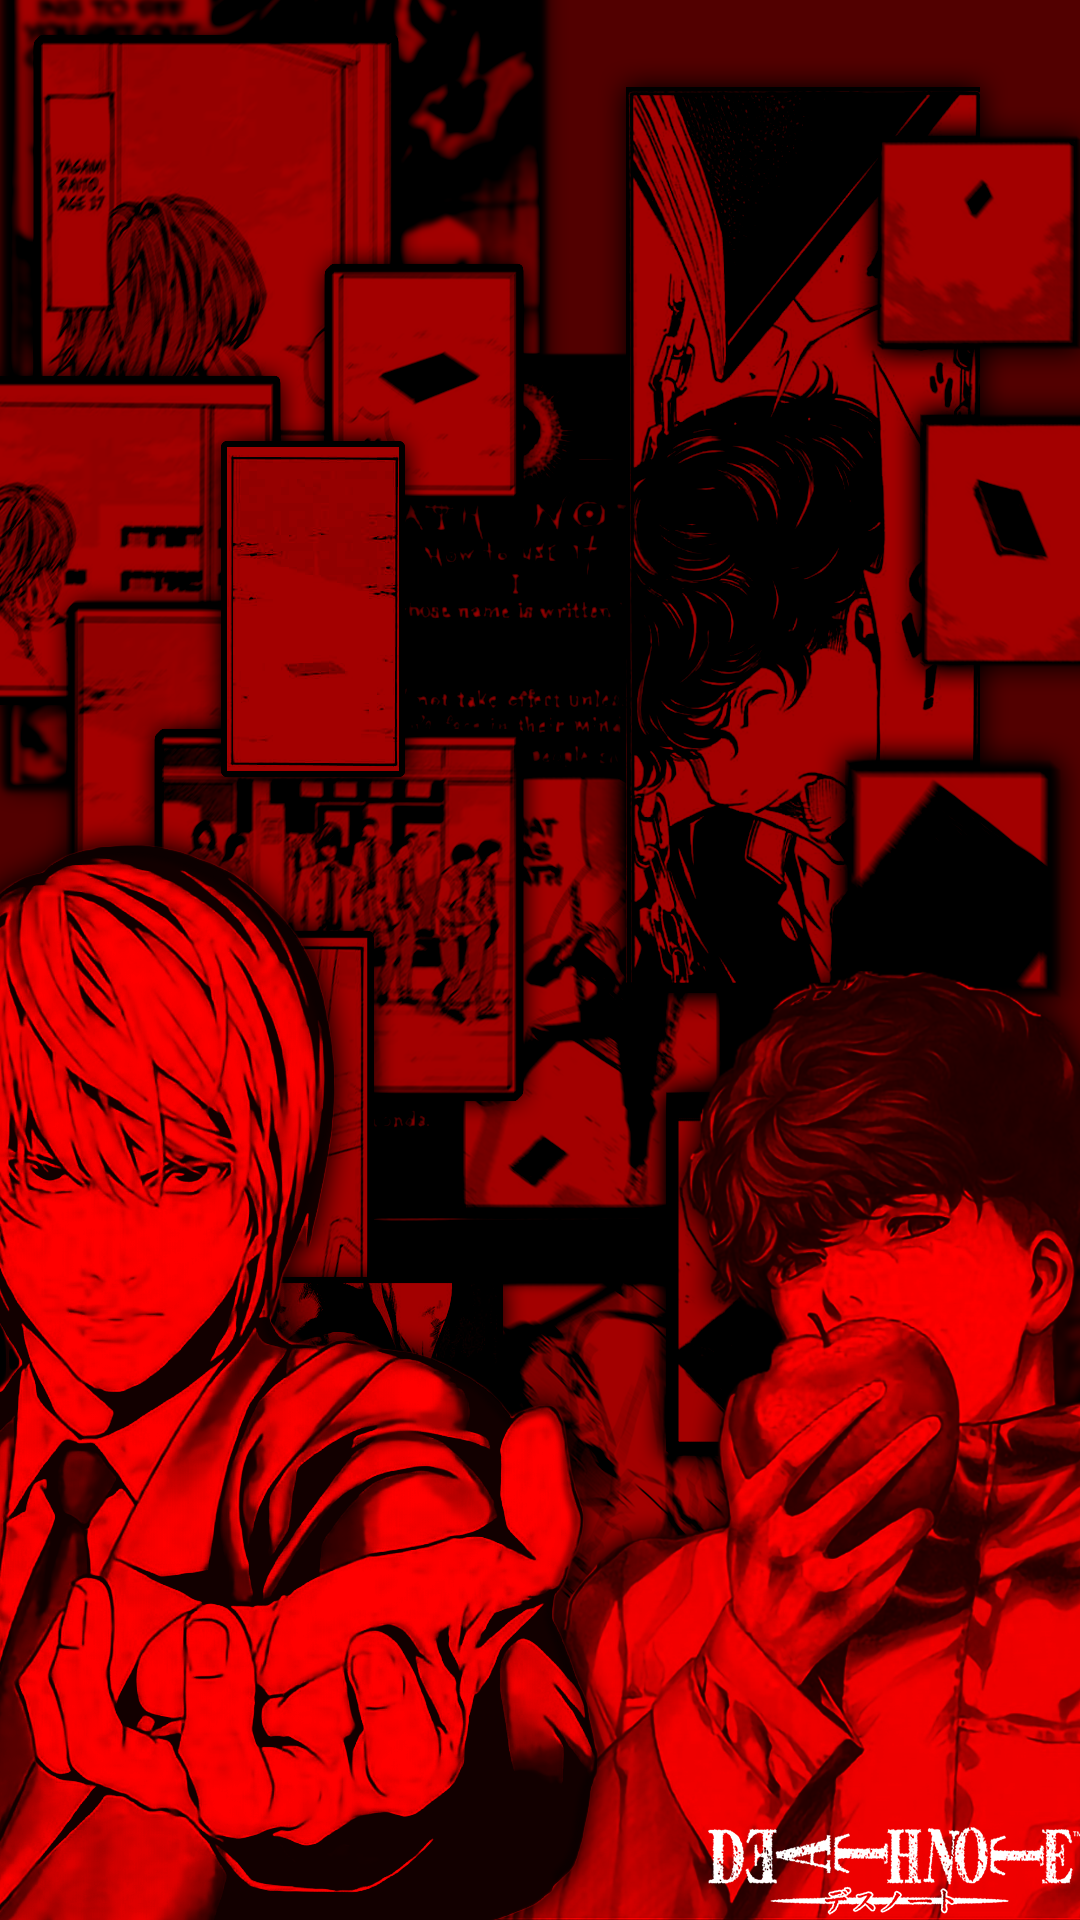 Every Kira has the same fate. A wallpaper made for every Death Note fan. Feedback much appreciated